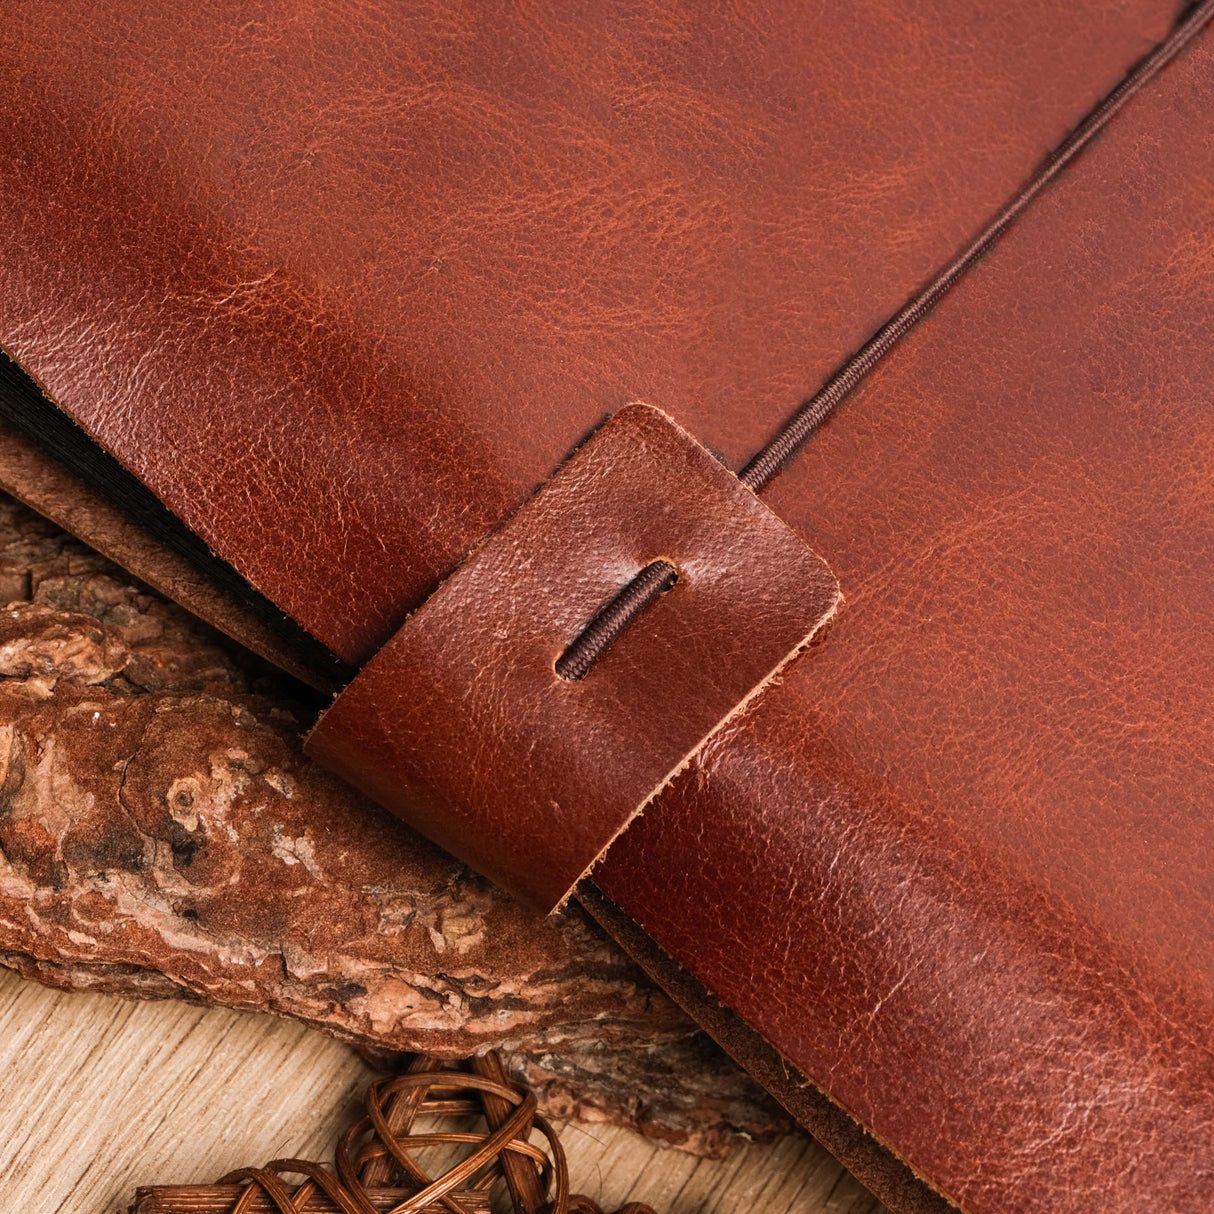 GEX Personalized Brown Leather Photo Album - GexWorldwide